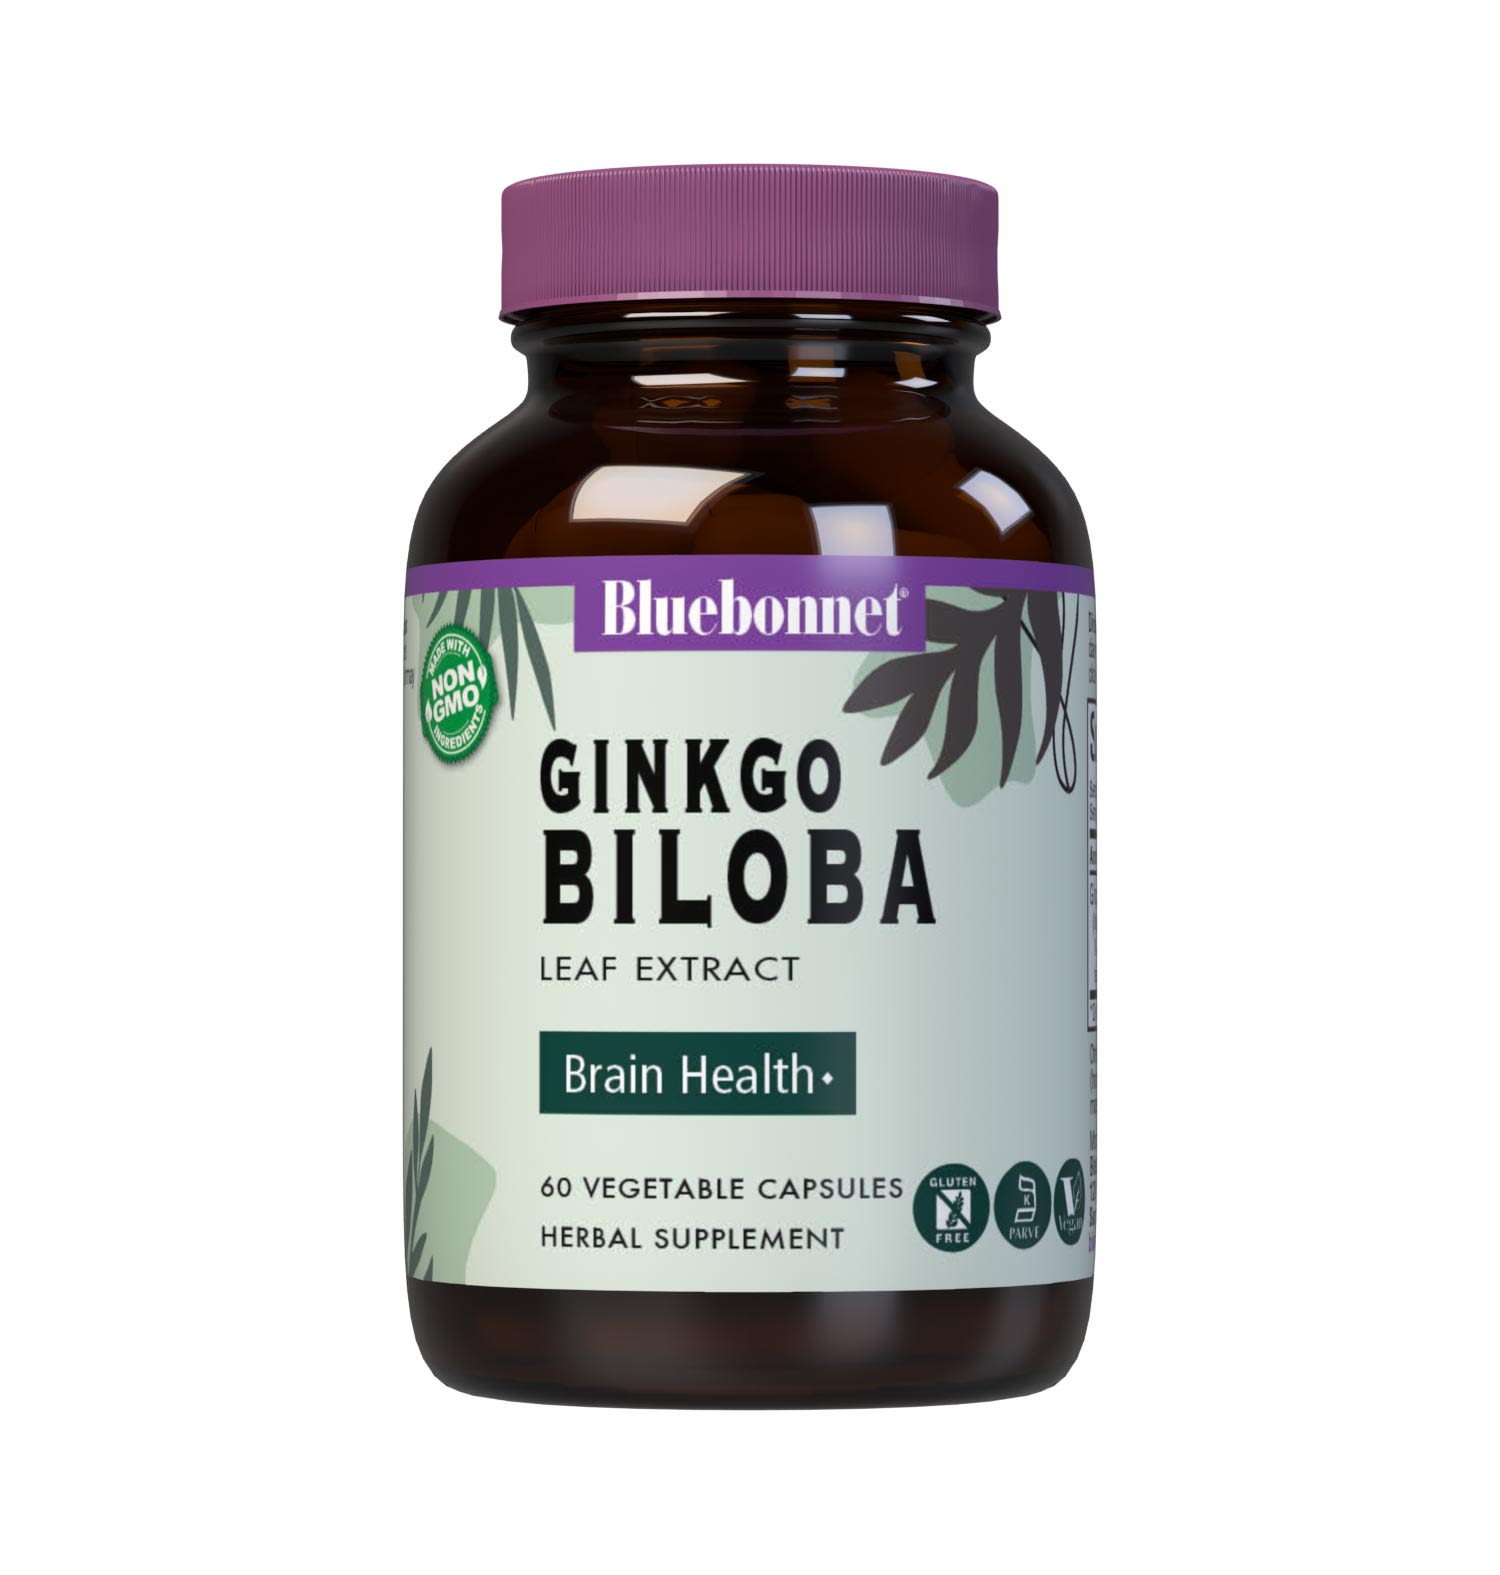 Bluebonnet’s Ginkgo Biloba Leaf Extract 60 Vegetable Capsules contain Ginkgoselect from Indena, a standardized extract of ginkgo flavoglycosides and terpene lactones, the most researched active constituents found in ginkgo biloba which may help support brain health and focus. A clean and gentle water-based extraction method is employed to capture and preserve ginkgo biloba’s most valuable components. #size_60 count